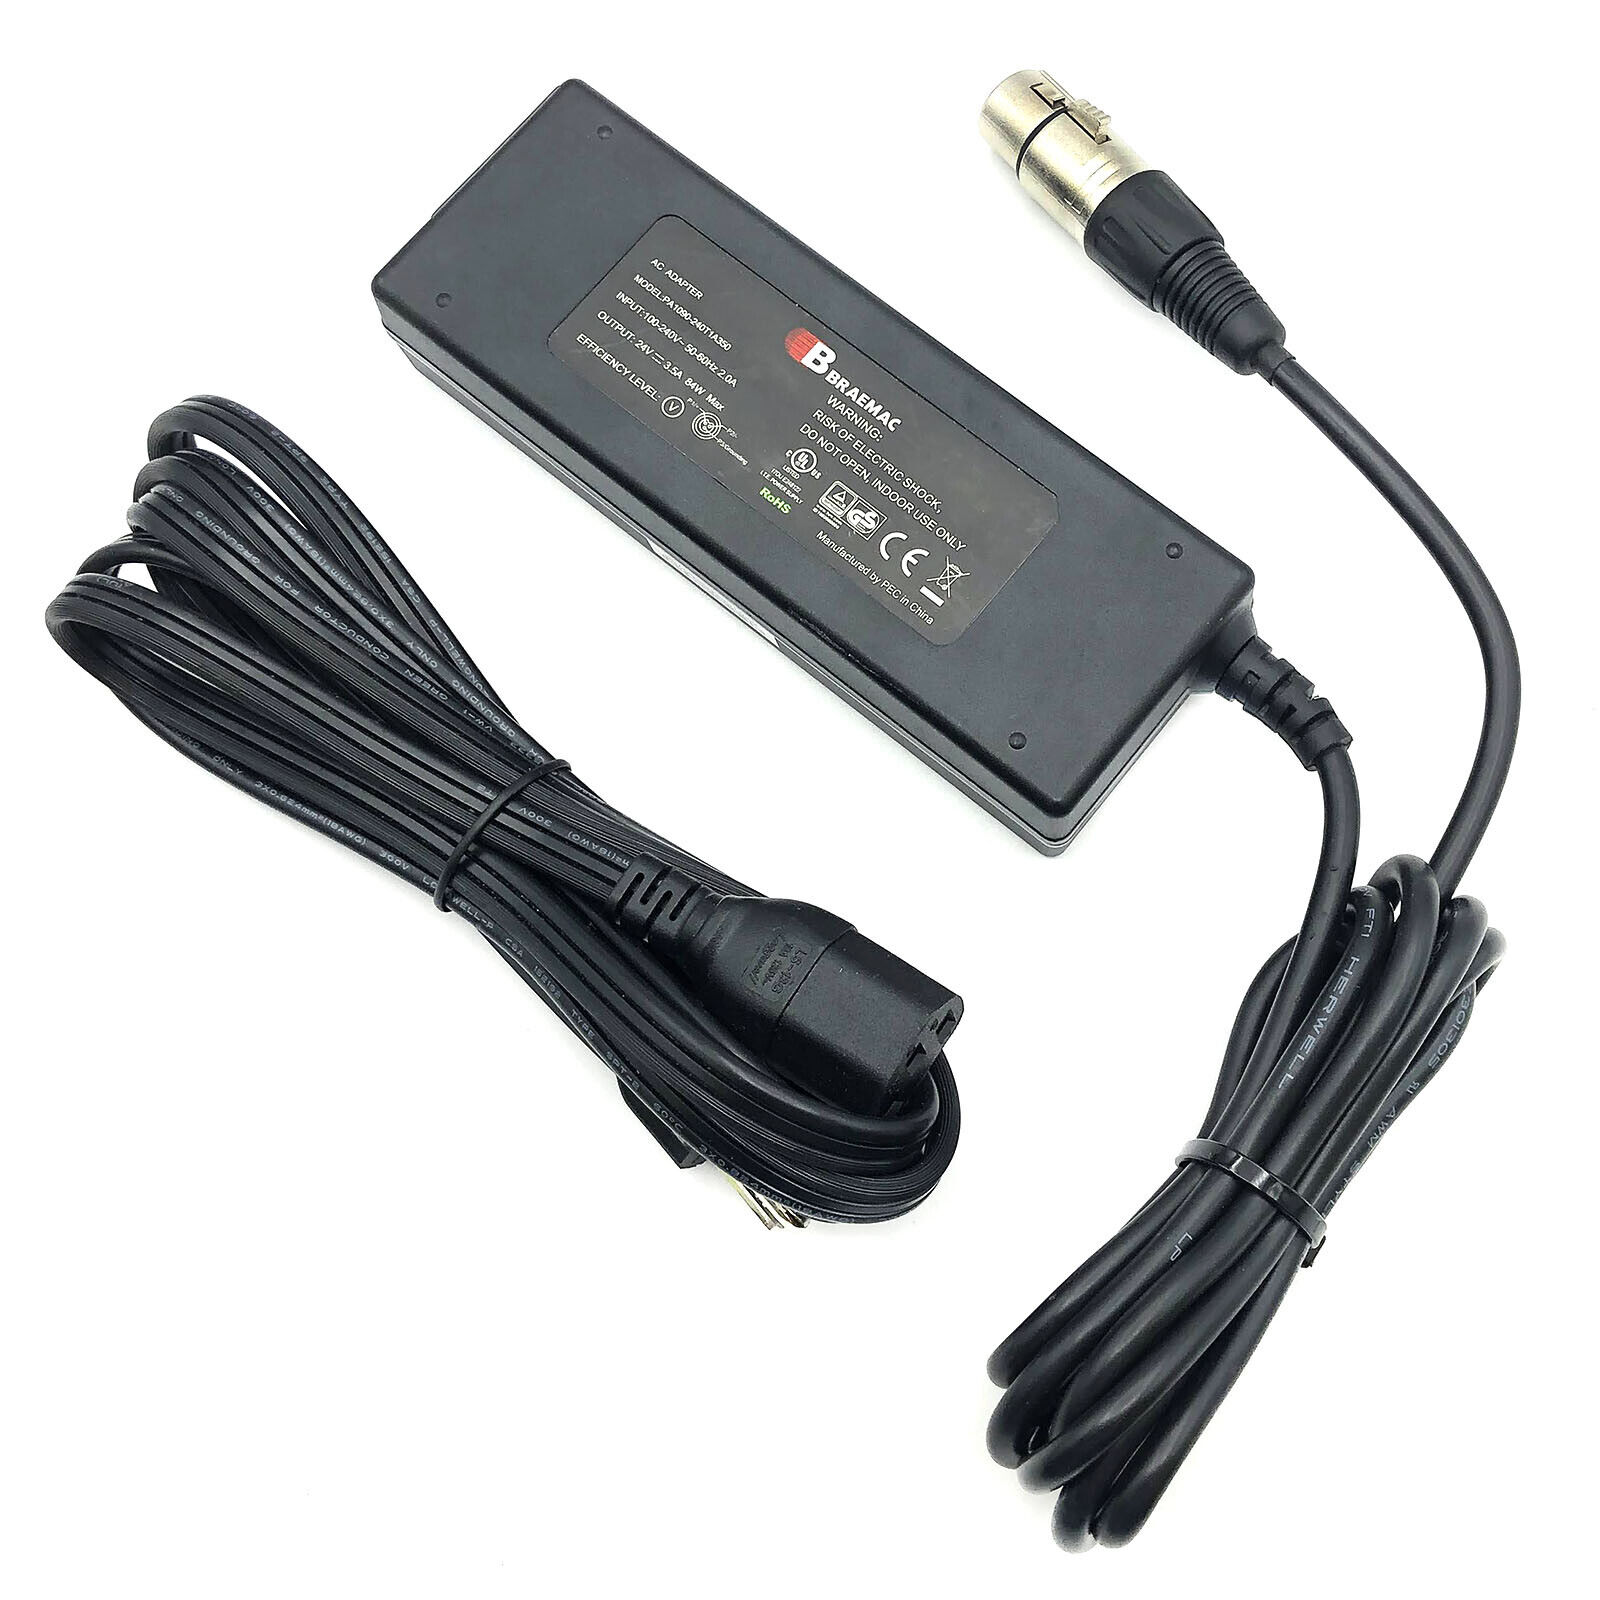 NEW Braemac 24V 3A Power Supply for Marshall V-R201P-AFHD LCD Monitor 4-pin XLR Brand: Braemac Type: AC DC Adapter